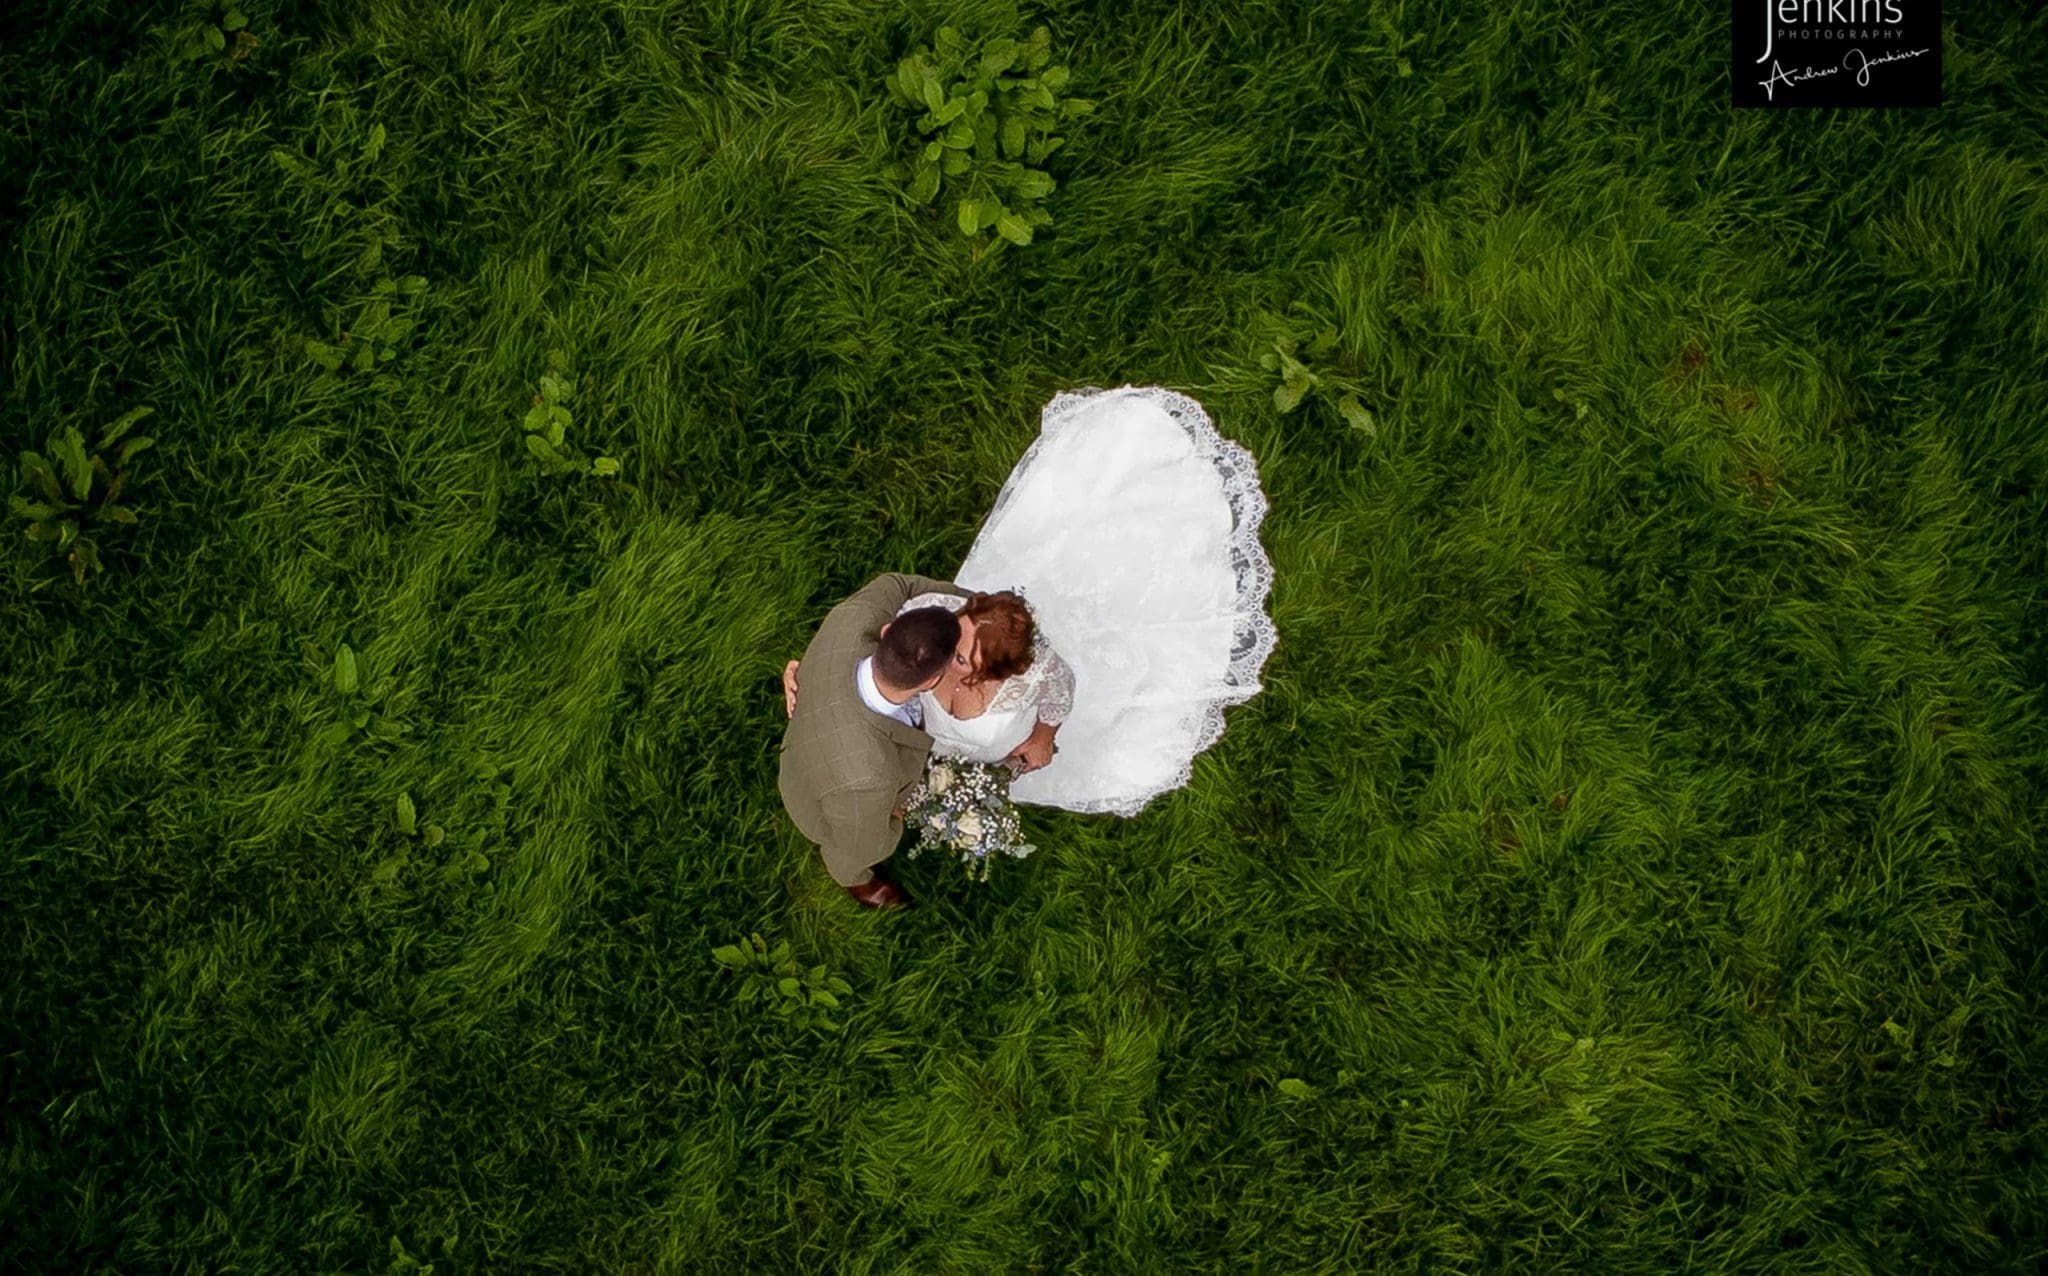 Kiss Me in the long green grass drone image from above